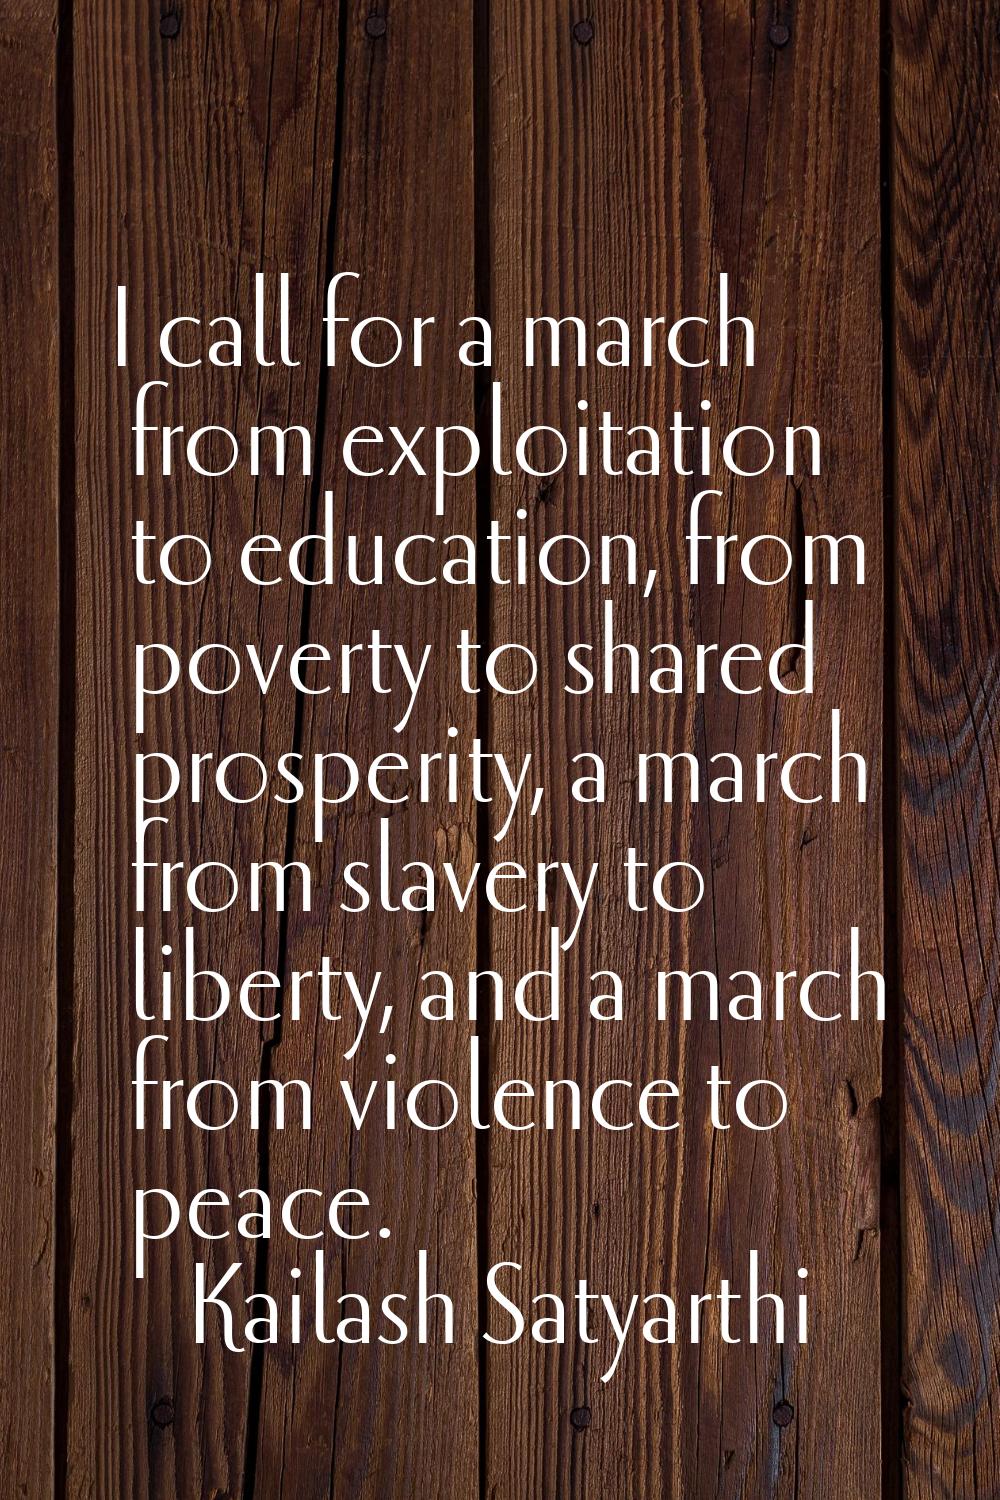 I call for a march from exploitation to education, from poverty to shared prosperity, a march from 